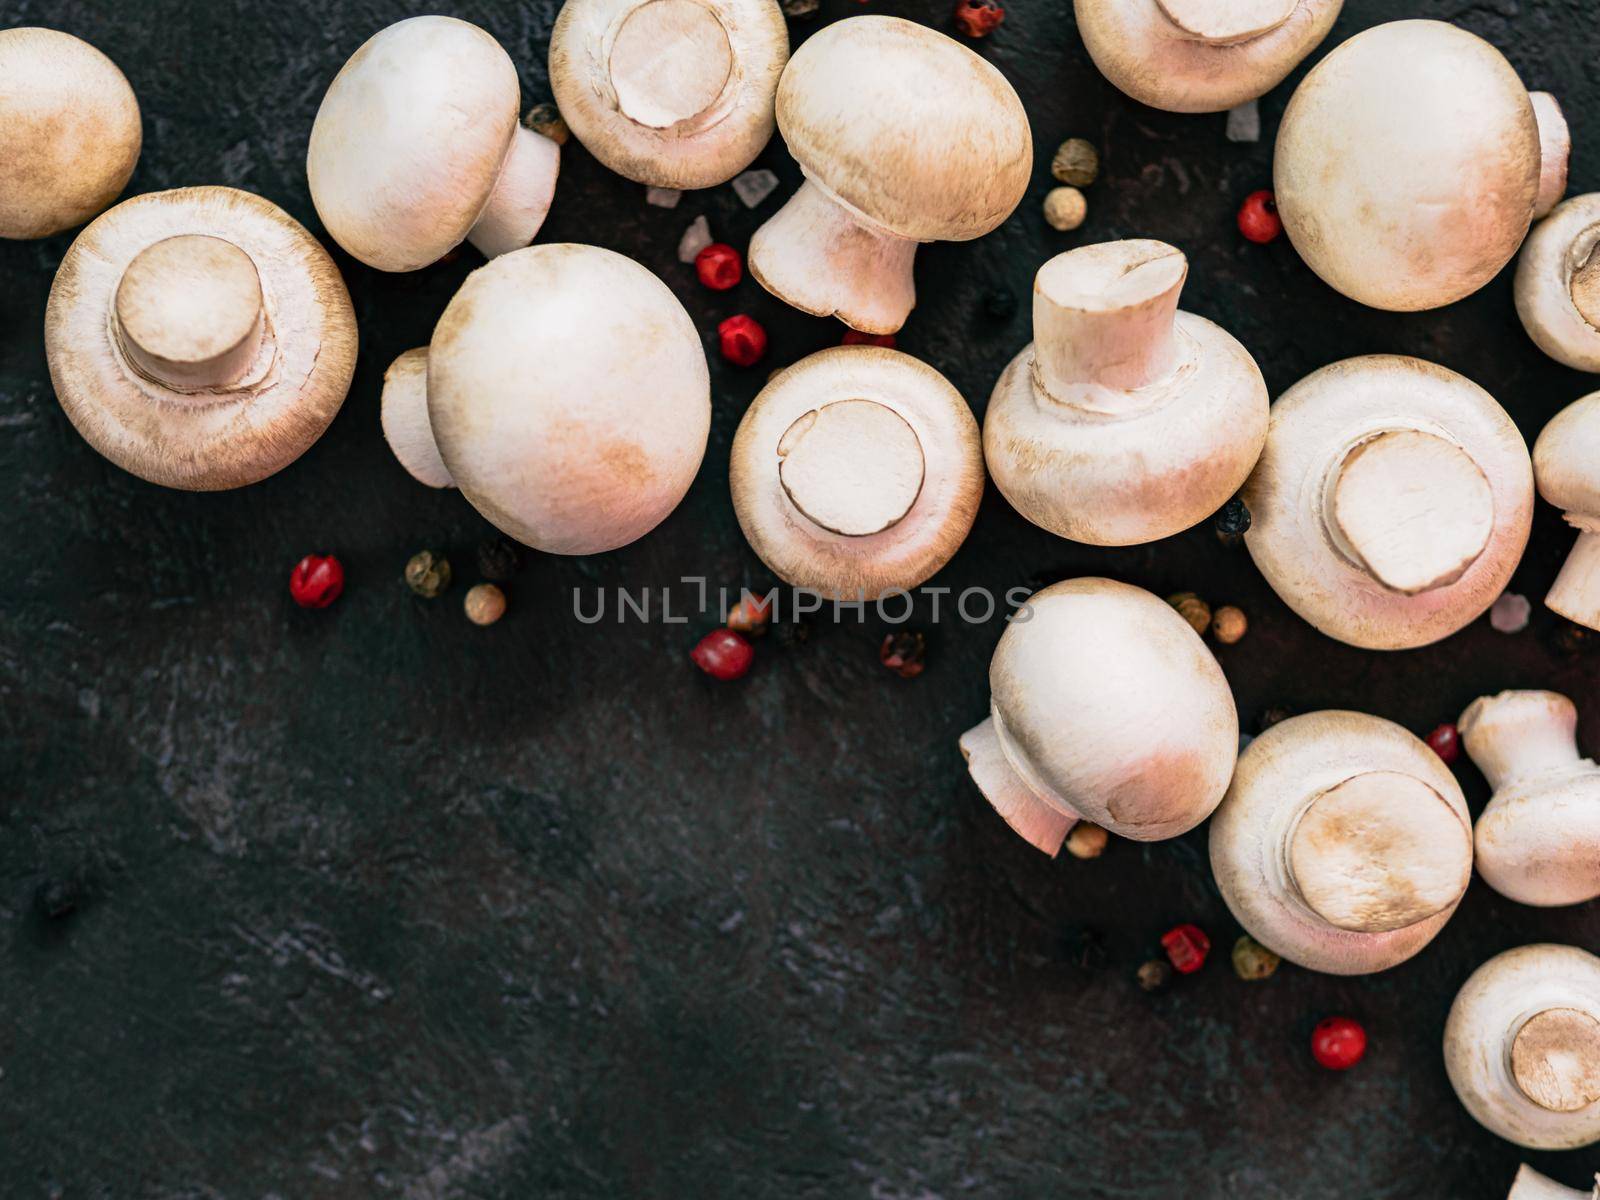 Mini champignons with copy space on left edge. Raw whole mushrooms on black background, copy space. Top view or flat lay.